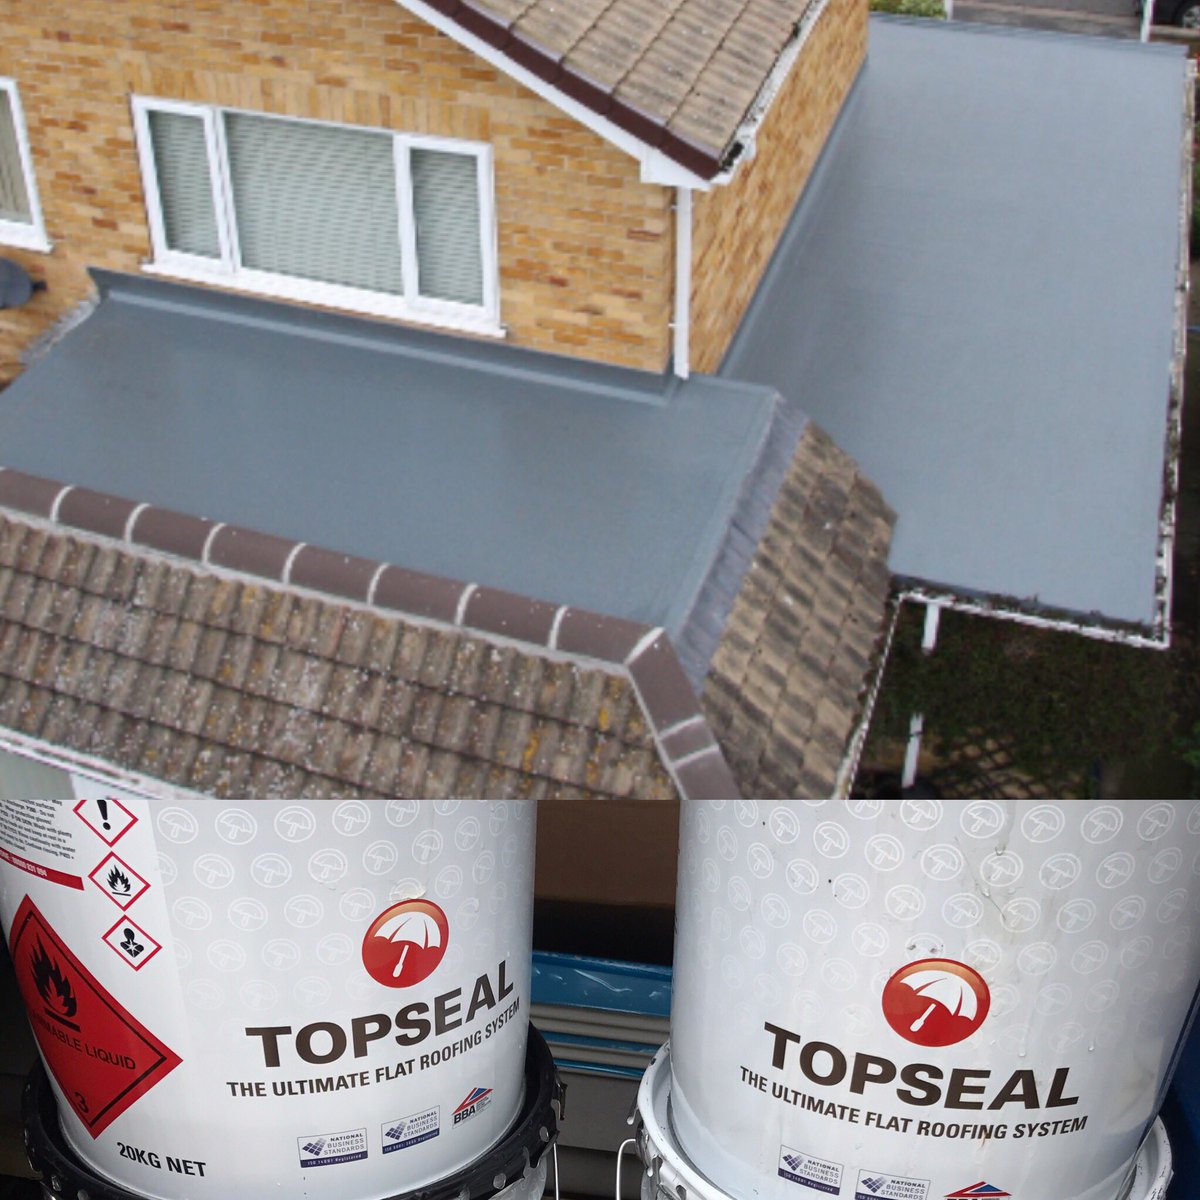 @blakegrproofing @TopsealSystems BLAKE GRP can give you the industry leading TOPSEAL guarantees from 25 to 40 YEARS!!!! Get a quote today!!